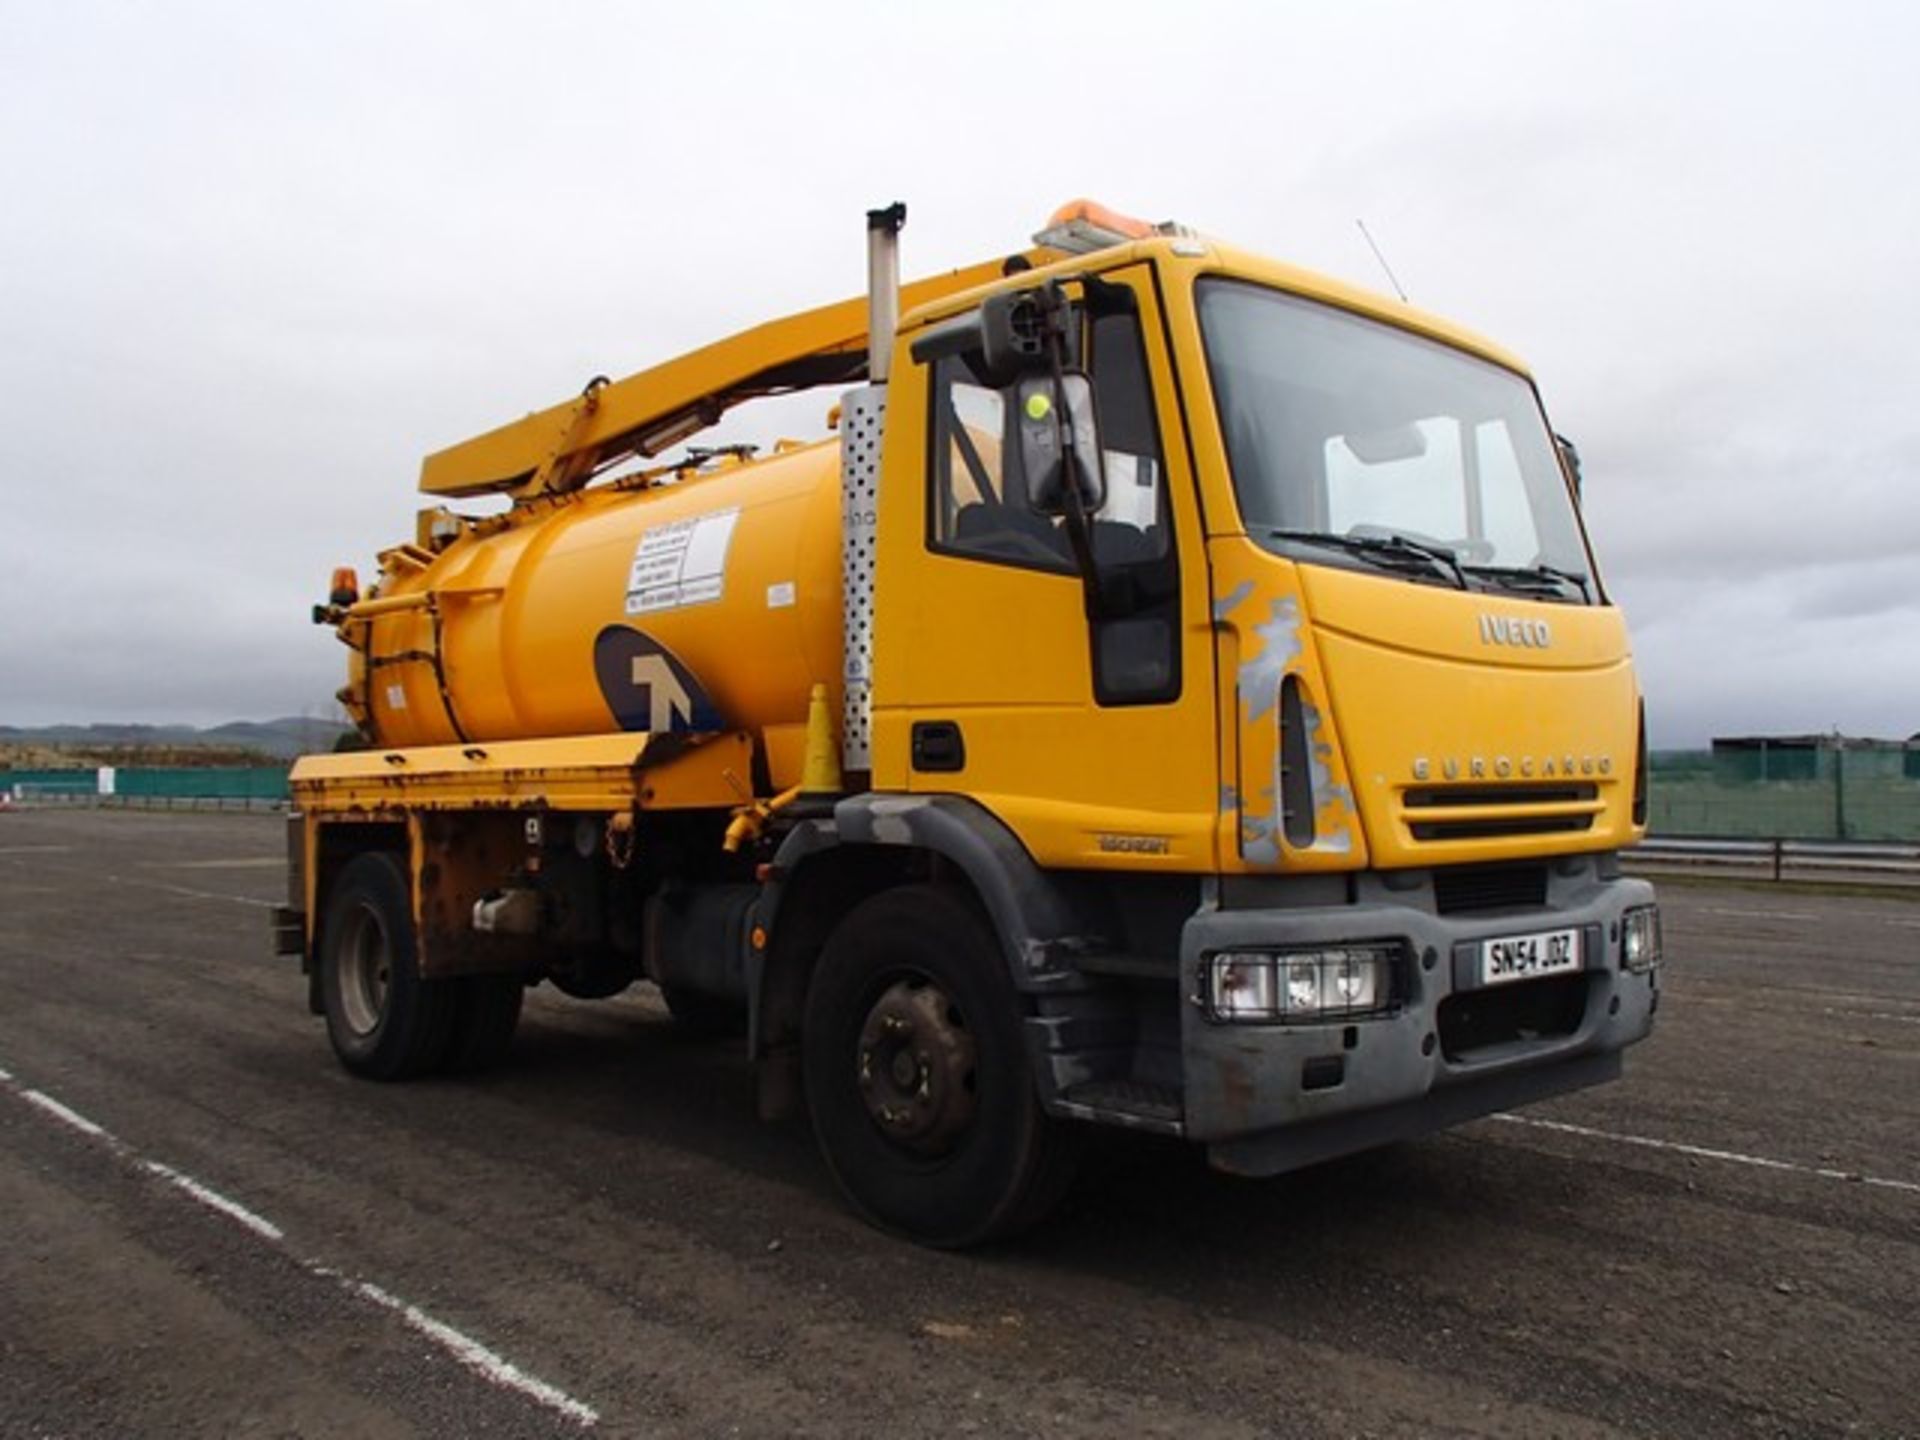 IVECO EUROCARGO - 5880cc
Body: 2 Dr Truck
Color: Yellow
First Reg: 01/01/2005
Doors: 2
MOT: 31/10/ - Image 14 of 15